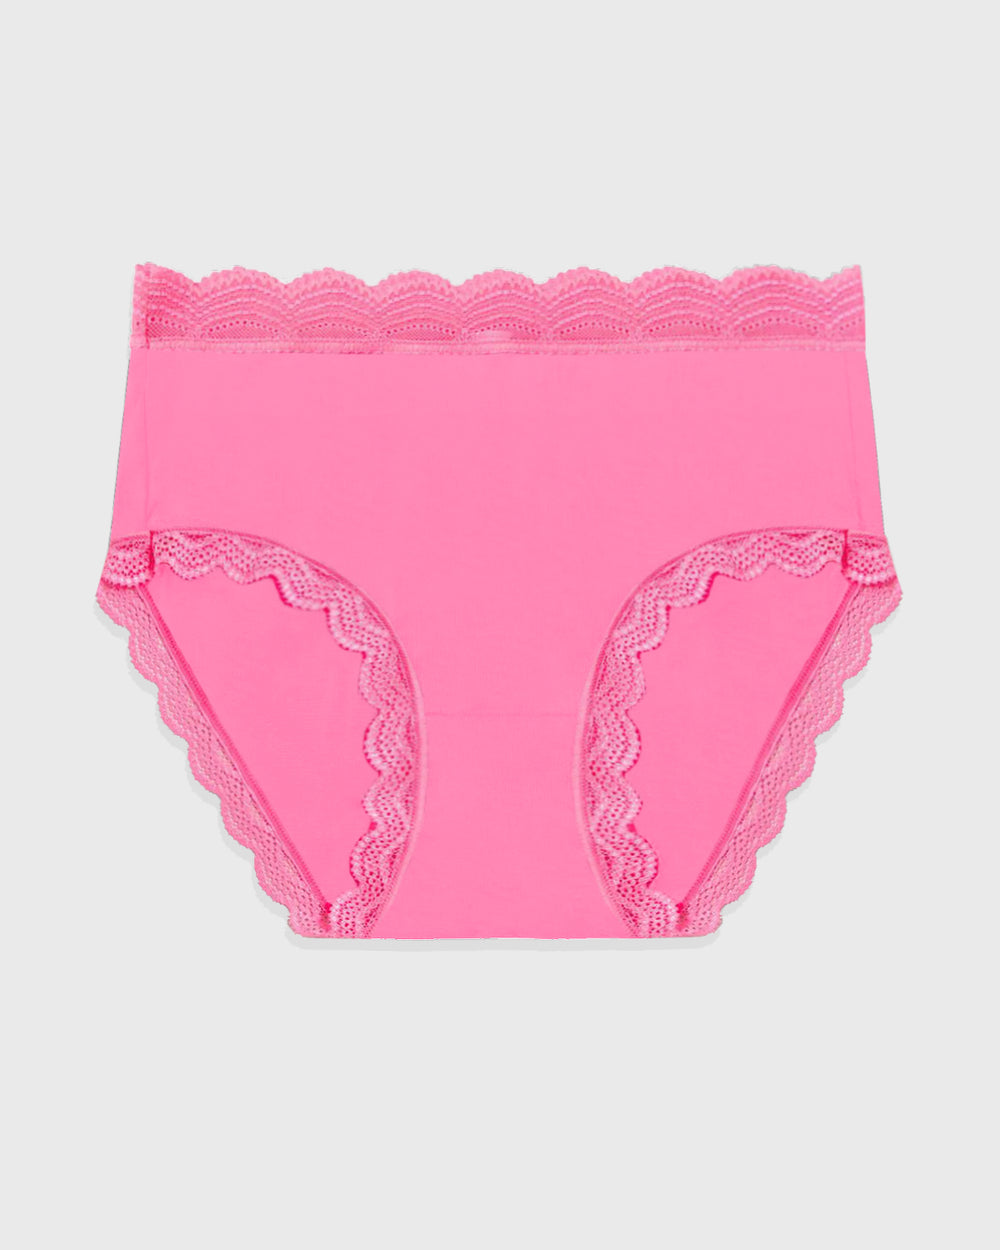 La Senza Pink Contrast Lace Trim Hipster Knickers/Briefs - Sizes S